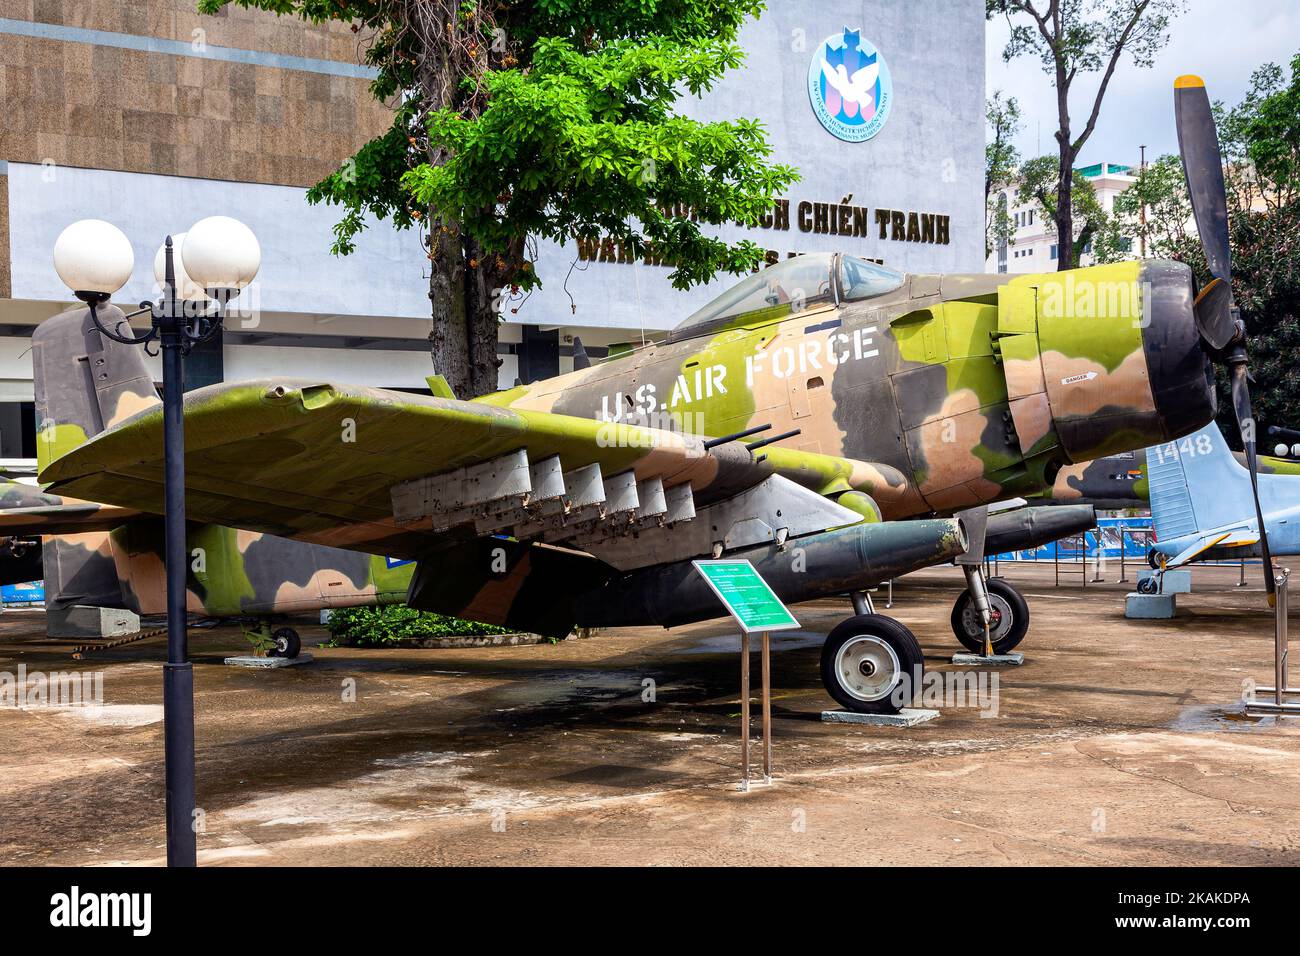 US Air Force propellor plane on show at War Remnants Museum, Ho Chi Minh City, Vietnam Stock Photo